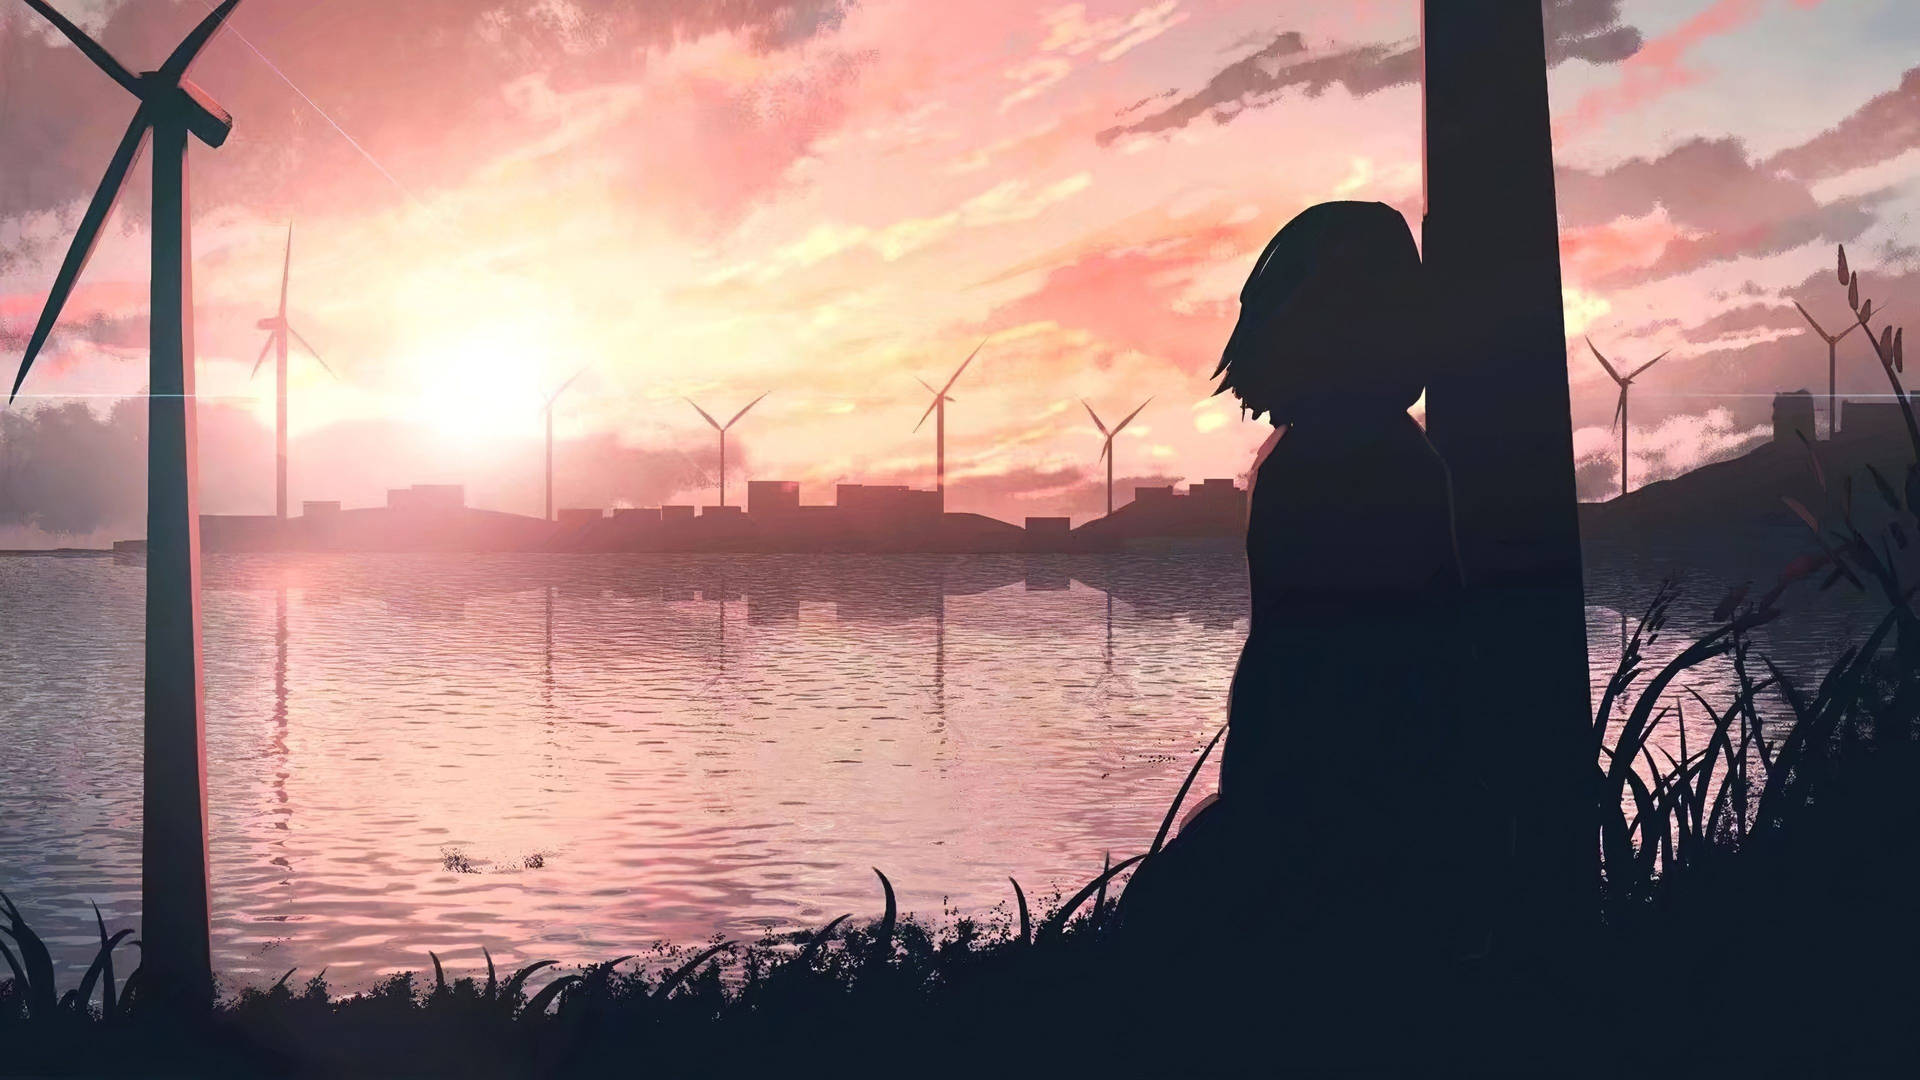 Anime Girl Sad Alone By Lake With Windmills Wallpaper